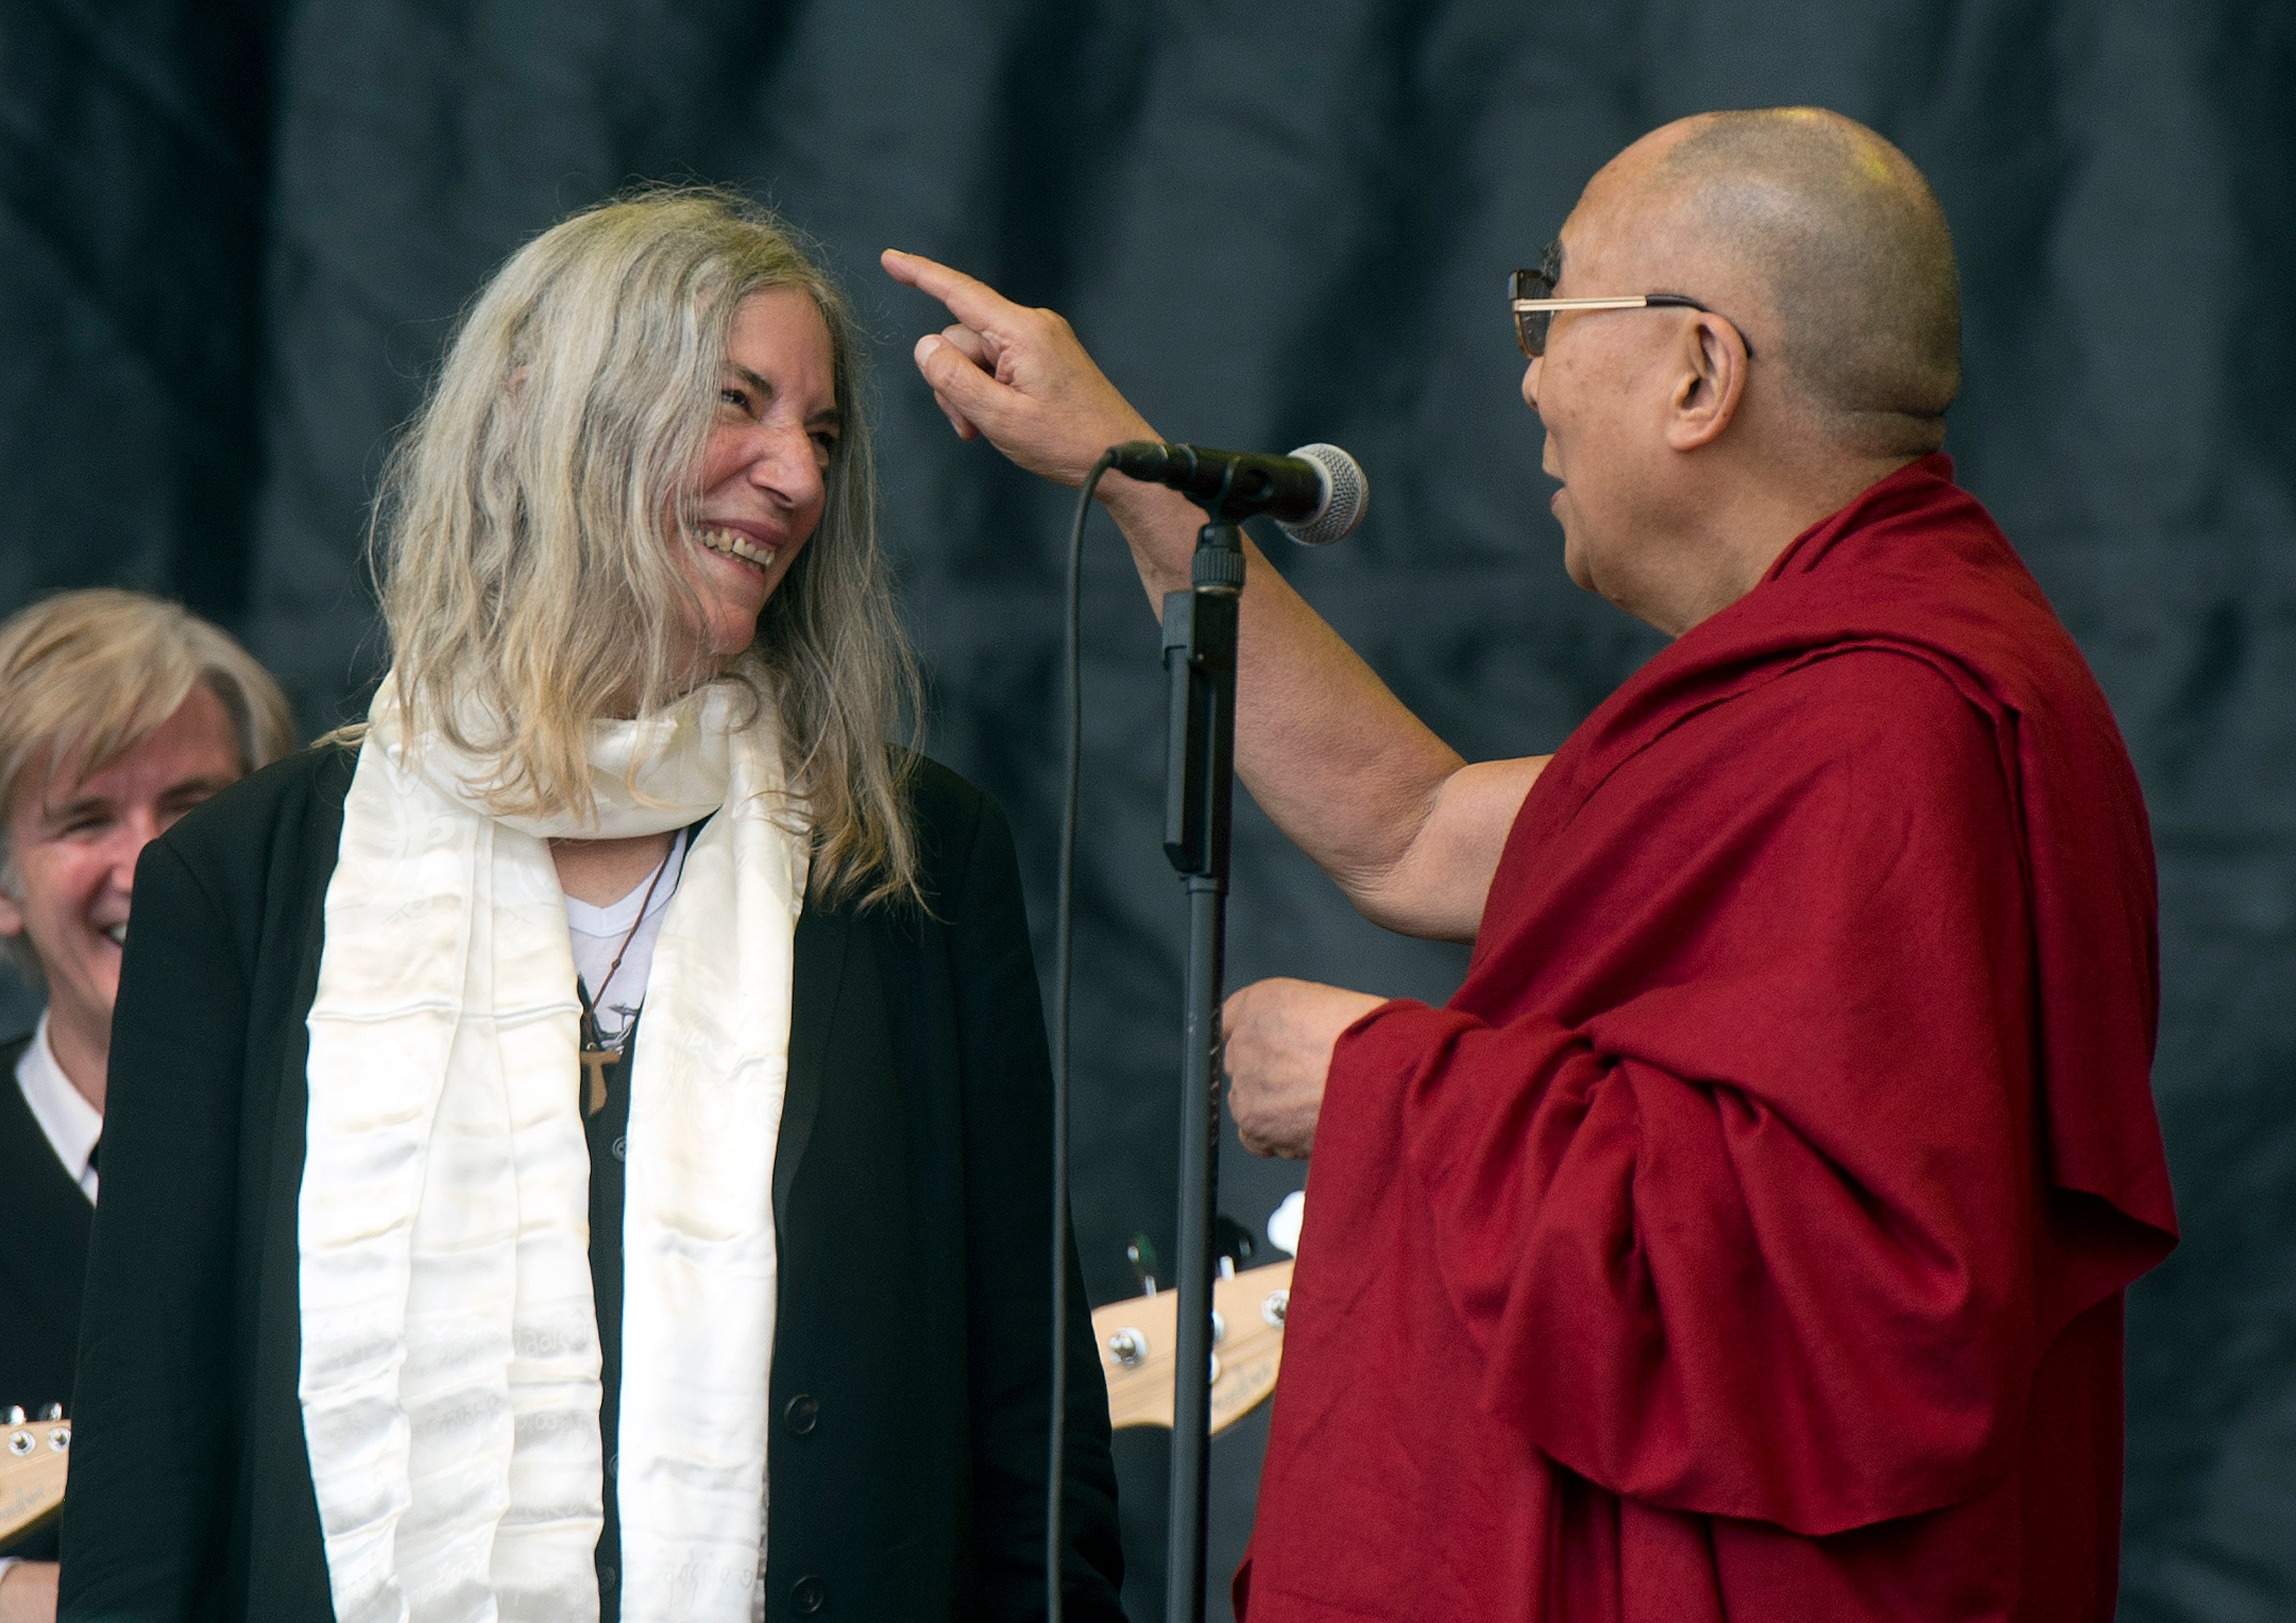 Tibetan spiritual leader, the Dalai Lama (R) joins US singer-songwriter Patti Smith (L) on The Pyramid Stage in 2015